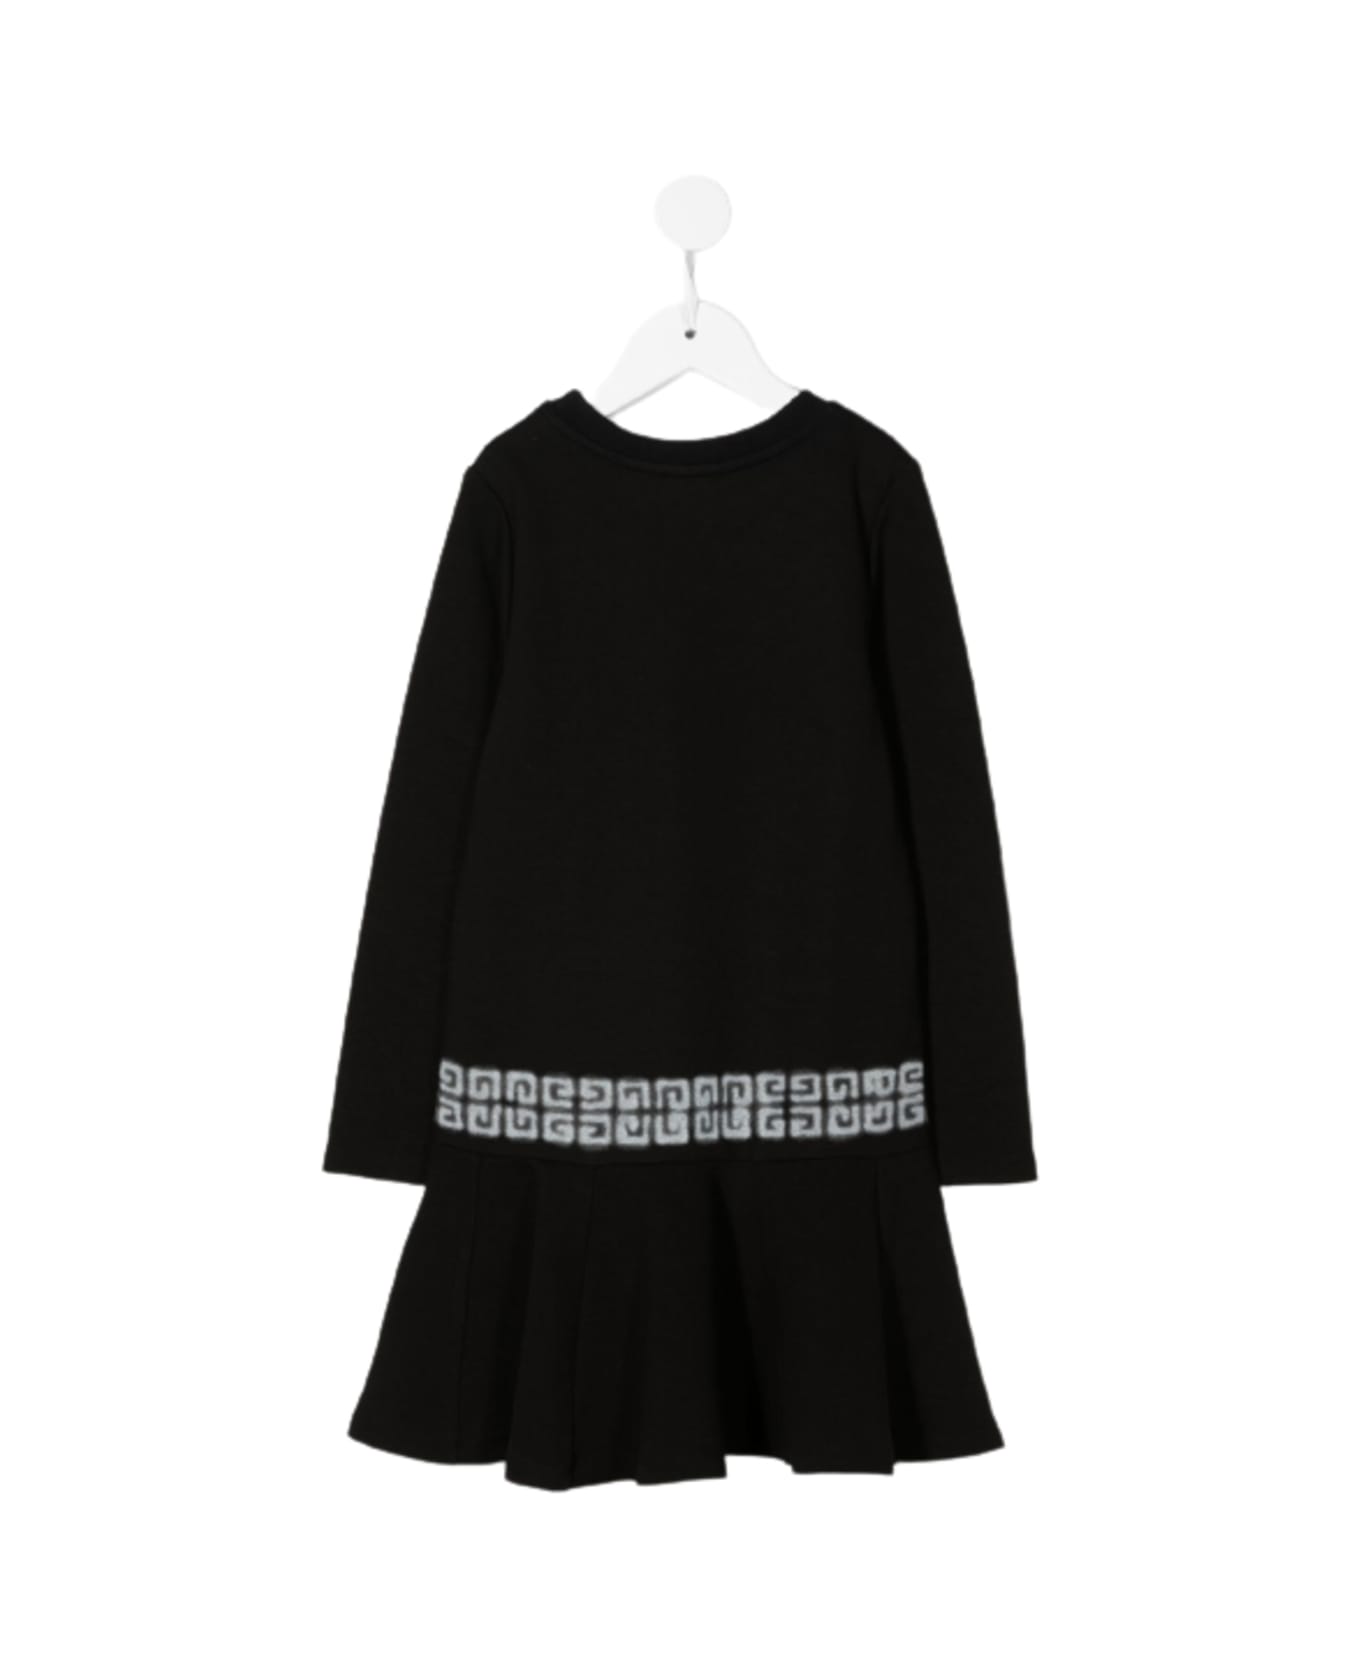 Givenchy Cotton Jersey Dress With Logo And 4g Print Givenchy Kids Girl - Black